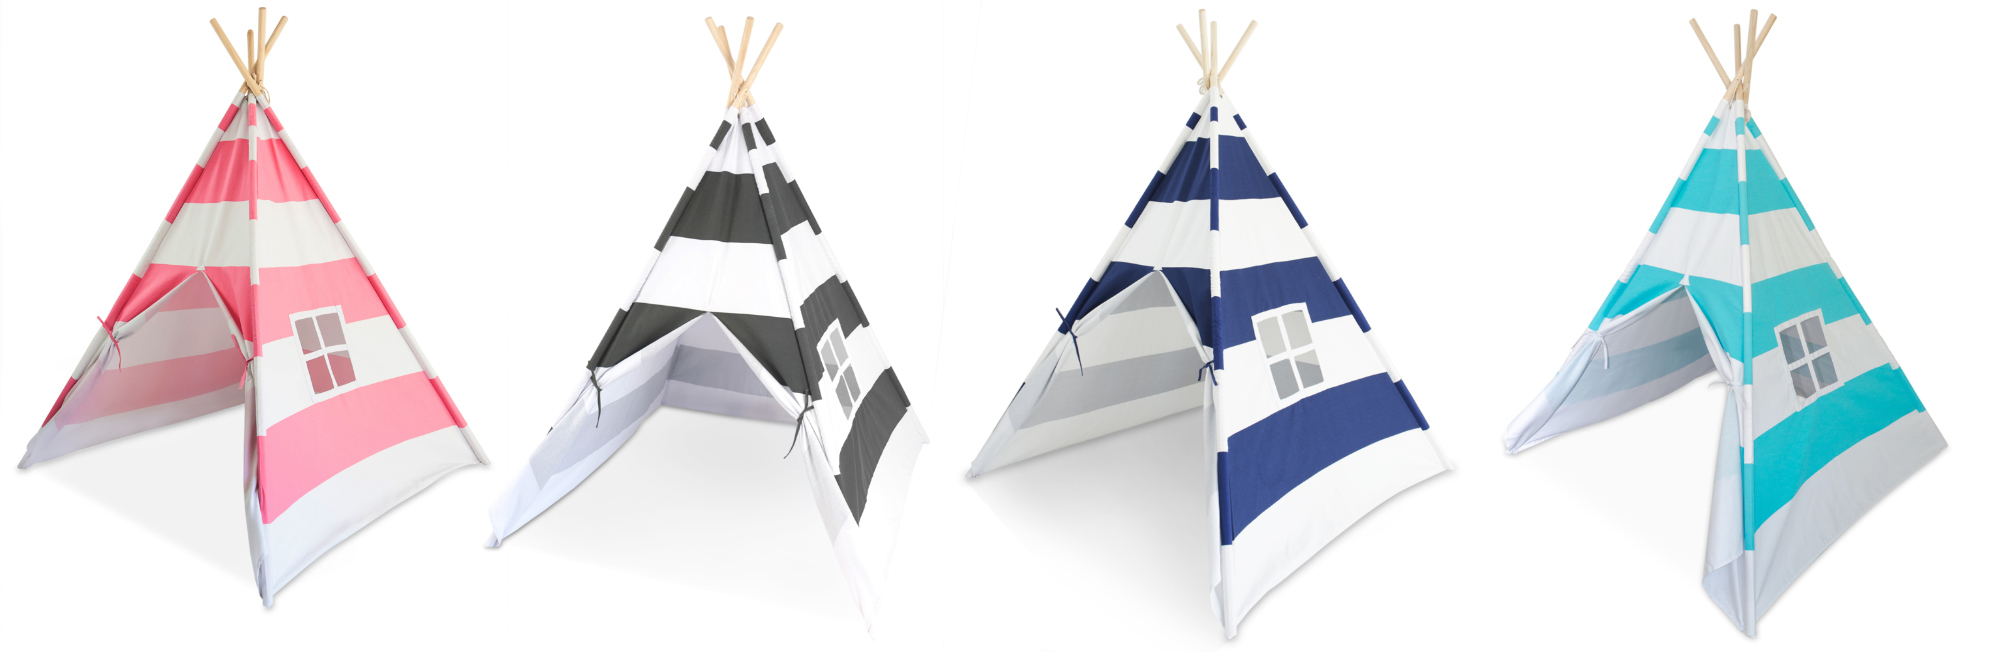 US Japan Fam reviews and loves Tiny Hideaways Teepee Tent - they come in 4 color options!